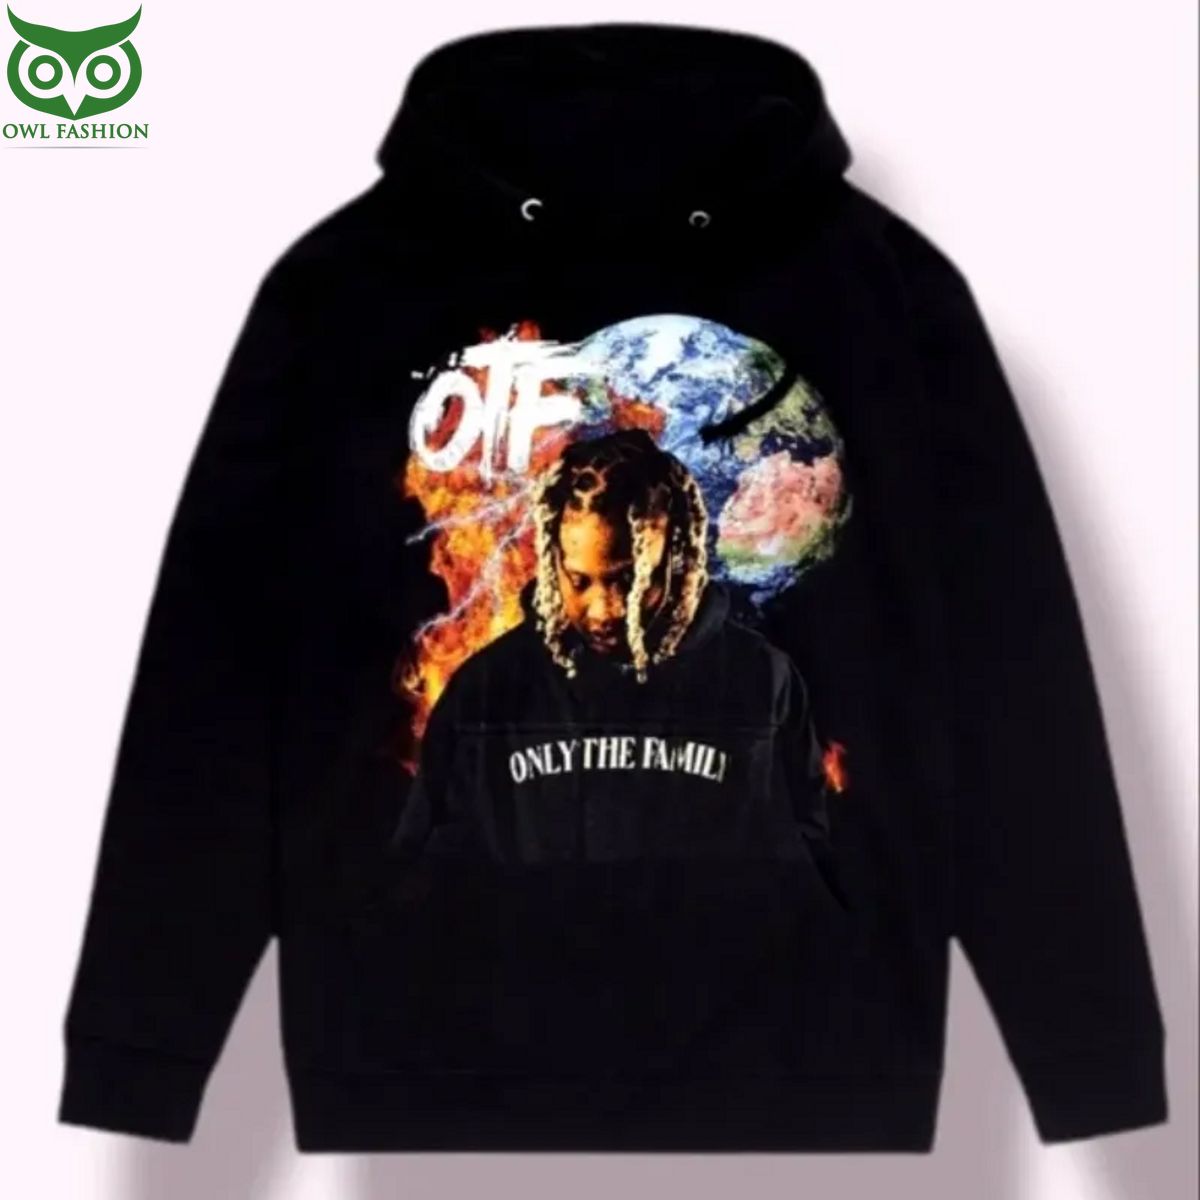 Otf Lil Durk only family Hoodies - Owl Fashion Shop